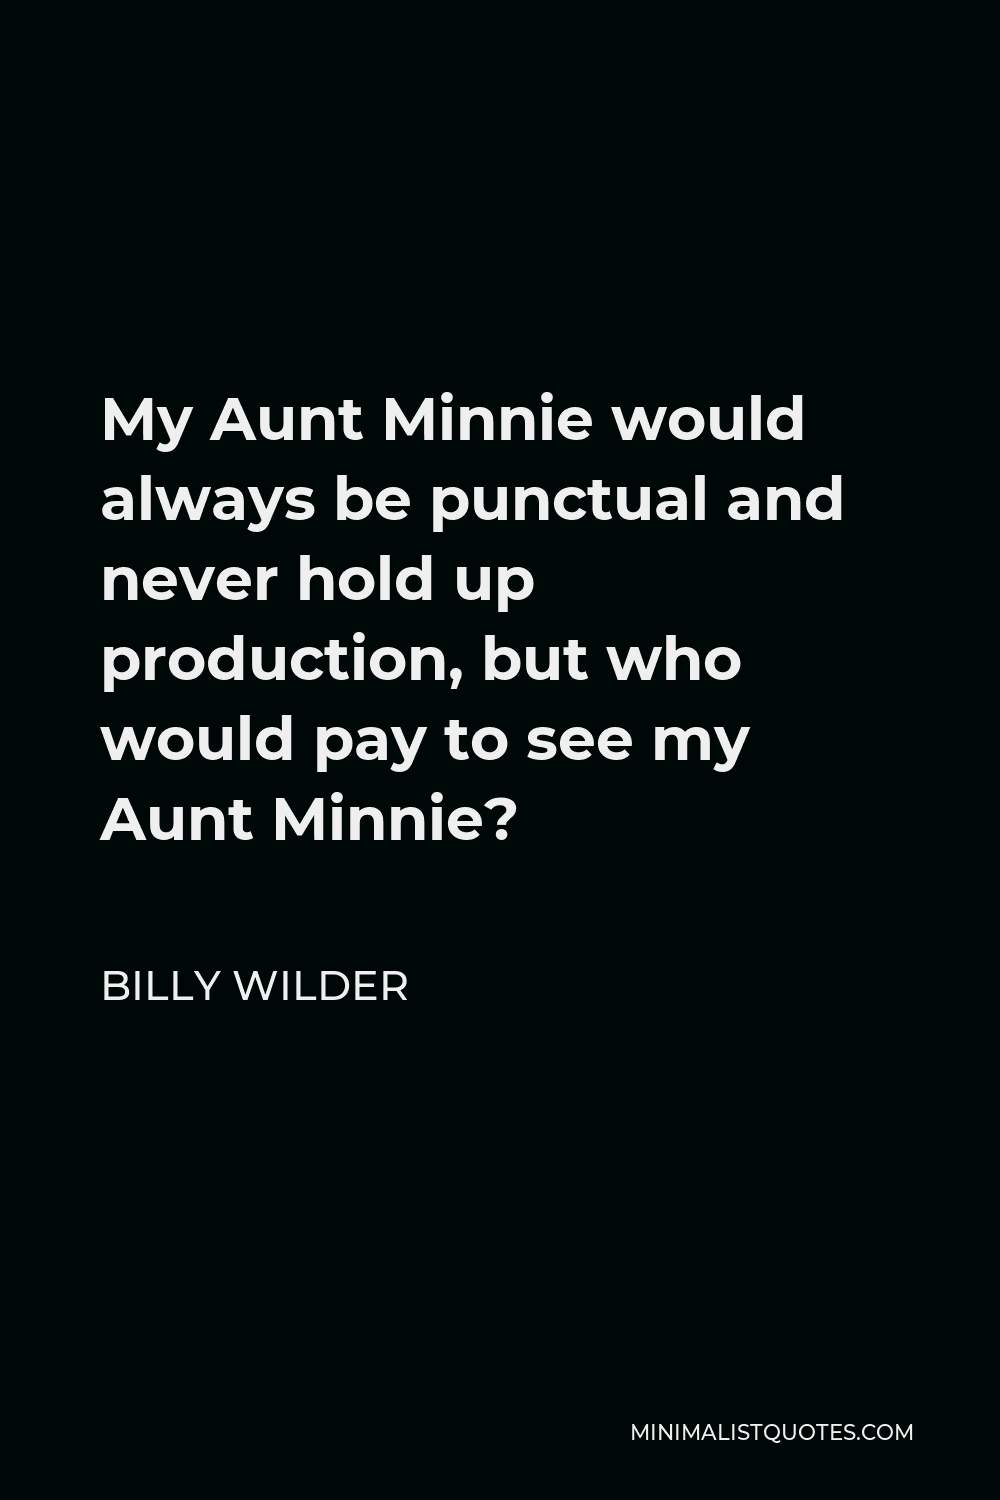 Billy Wilder Quote - My Aunt Minnie would always be punctual and never hold up production, but who would pay to see my Aunt Minnie?